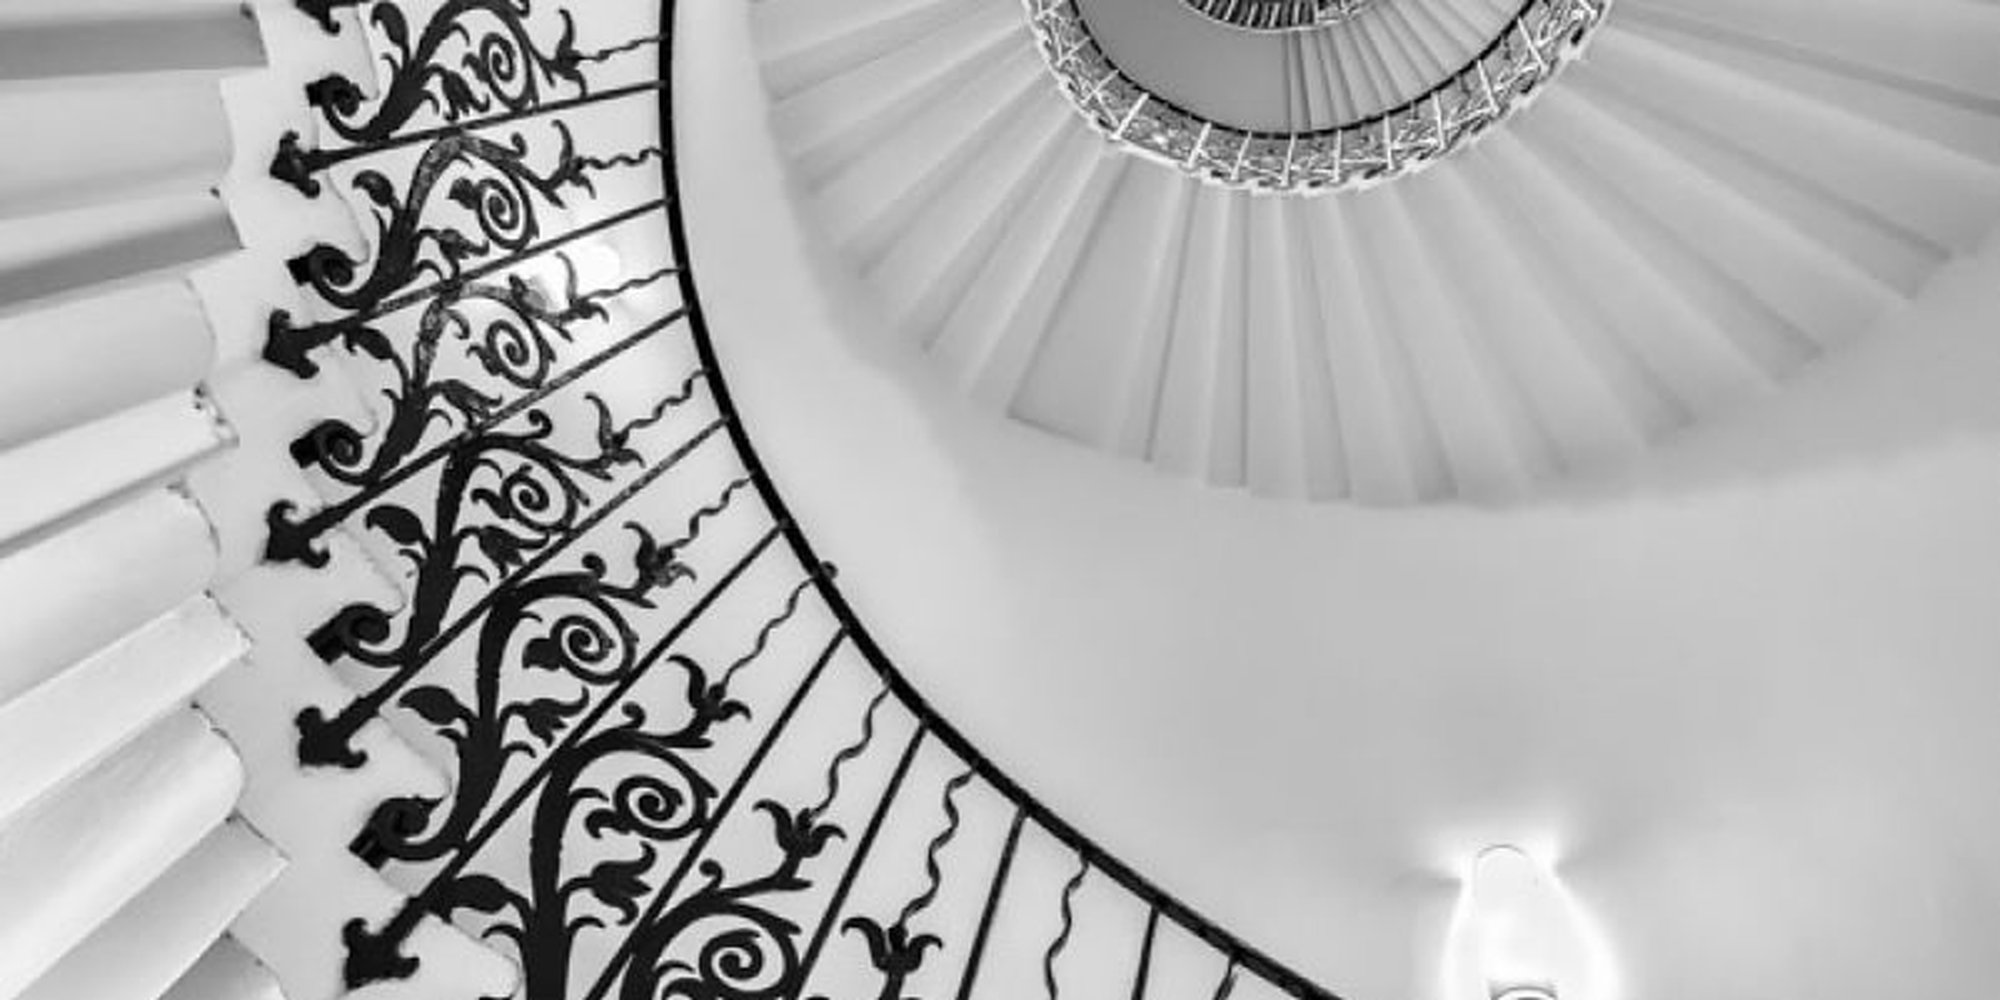 Art of the Day: "Ben Robson Hull, The Queen's House Tulip Staircase, London  - Limited Edition Print" by Ben Robson Hull